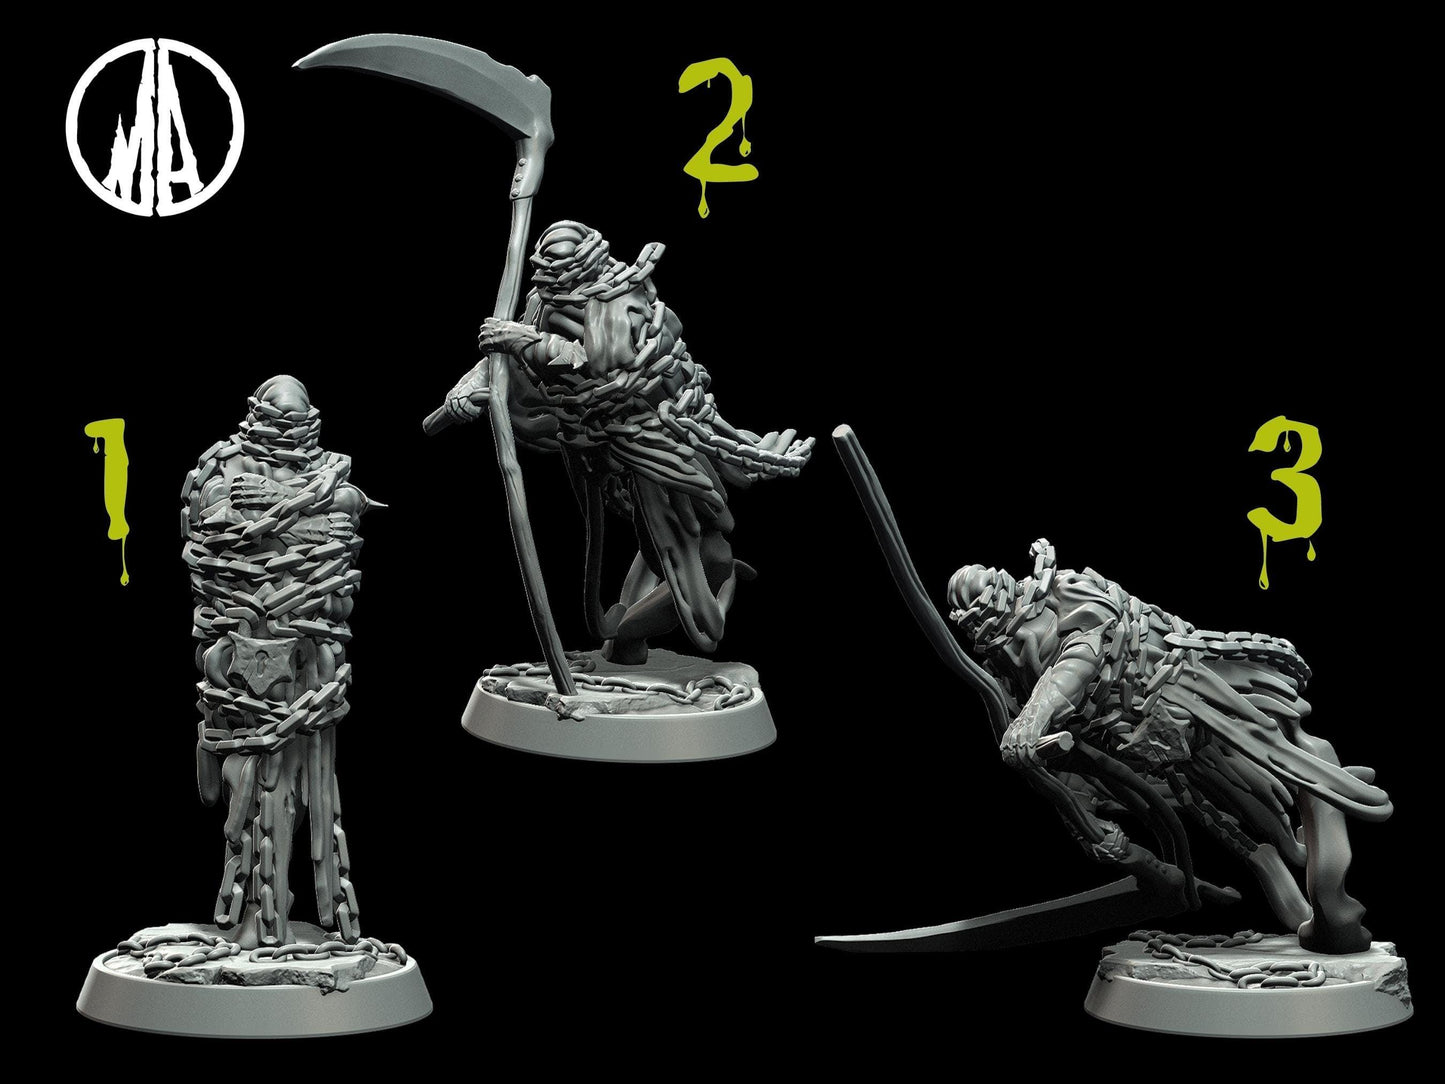 Imprisoned Soul Miniature dnd soul skeleton mini - 3 Poses - 28mm scale Tabletop gaming DnD Miniature Dungeons and Dragons,ttrpg dnd 5e - Plague Miniatures shop for DnD Miniatures